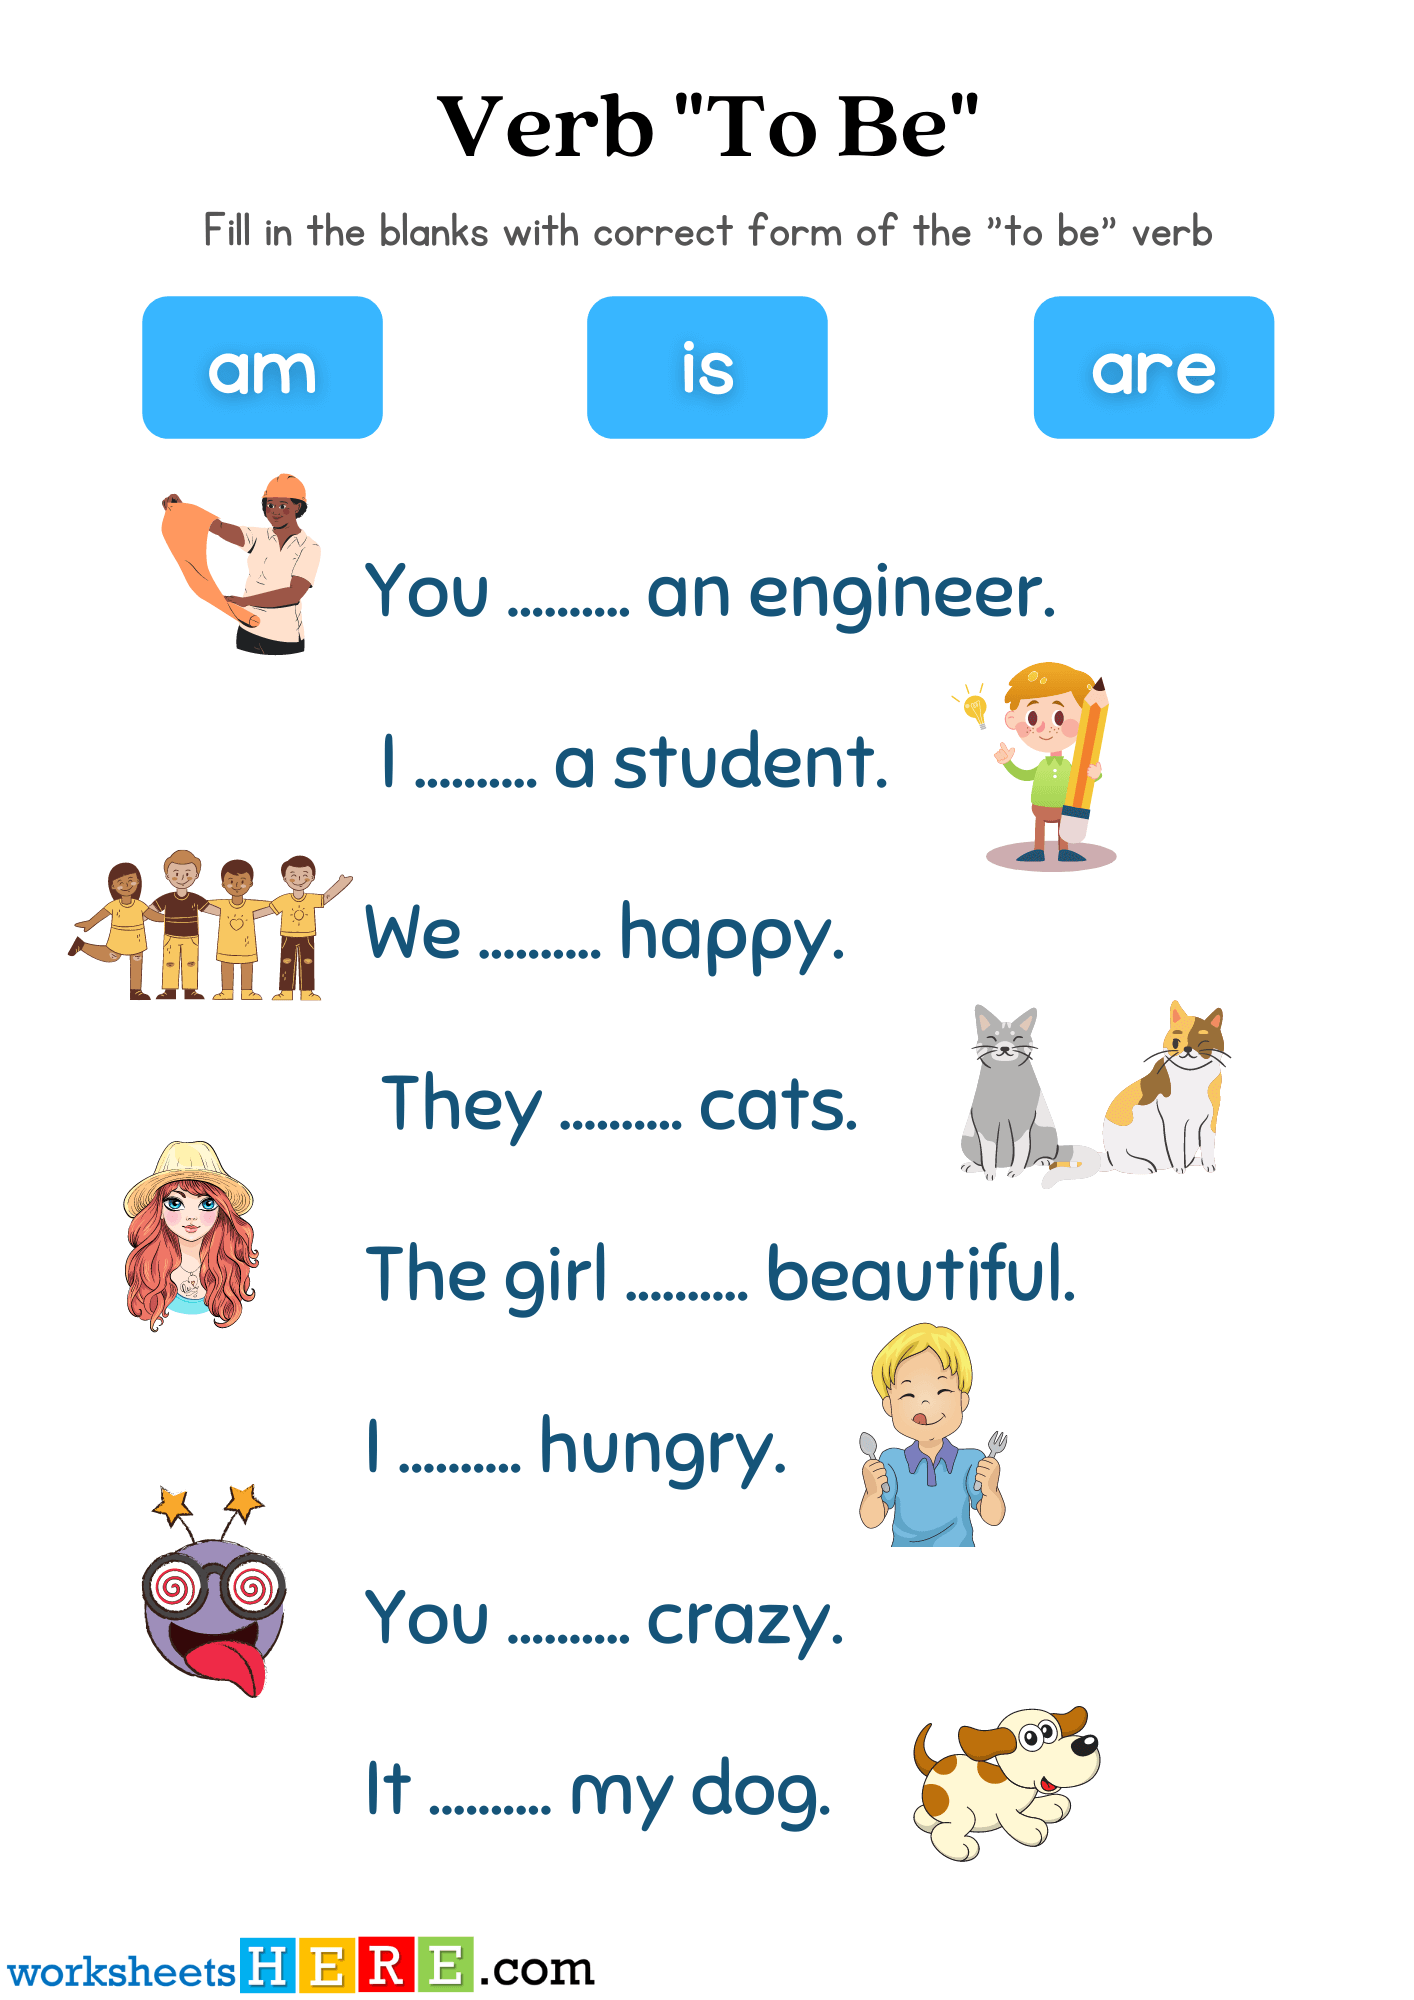 To Be Verb Worksheets with Pictures, Am is Are Pdf Worksheets